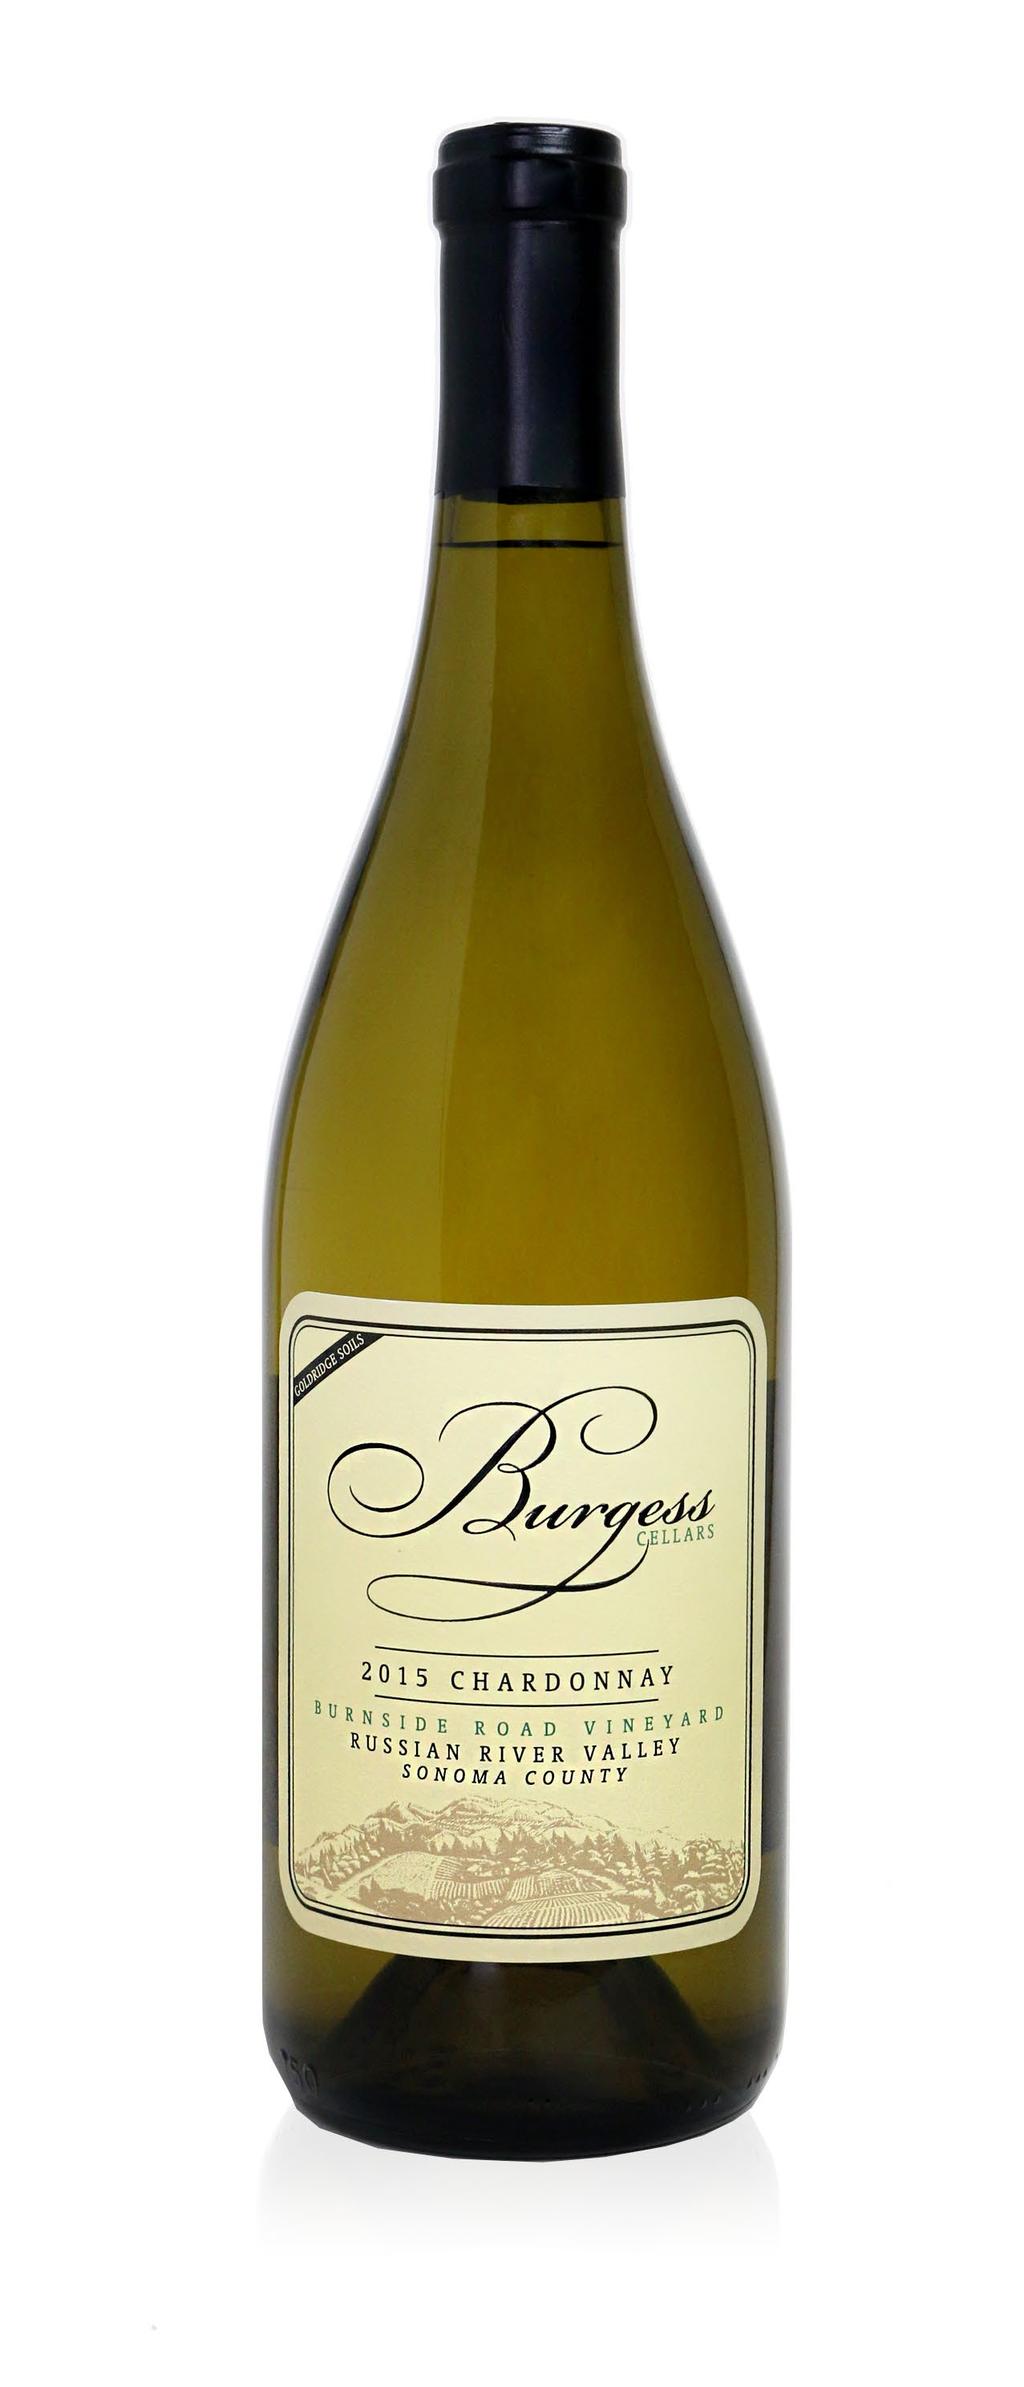 2015 CHARDONNAY RUSSIAN RIVER VALLEY, SONOMA COUNTY 100% Chardonnay ph 3.36 TA 6.6 g/l Alc 14.1% The 2015 growing season was early, even, and excellent!